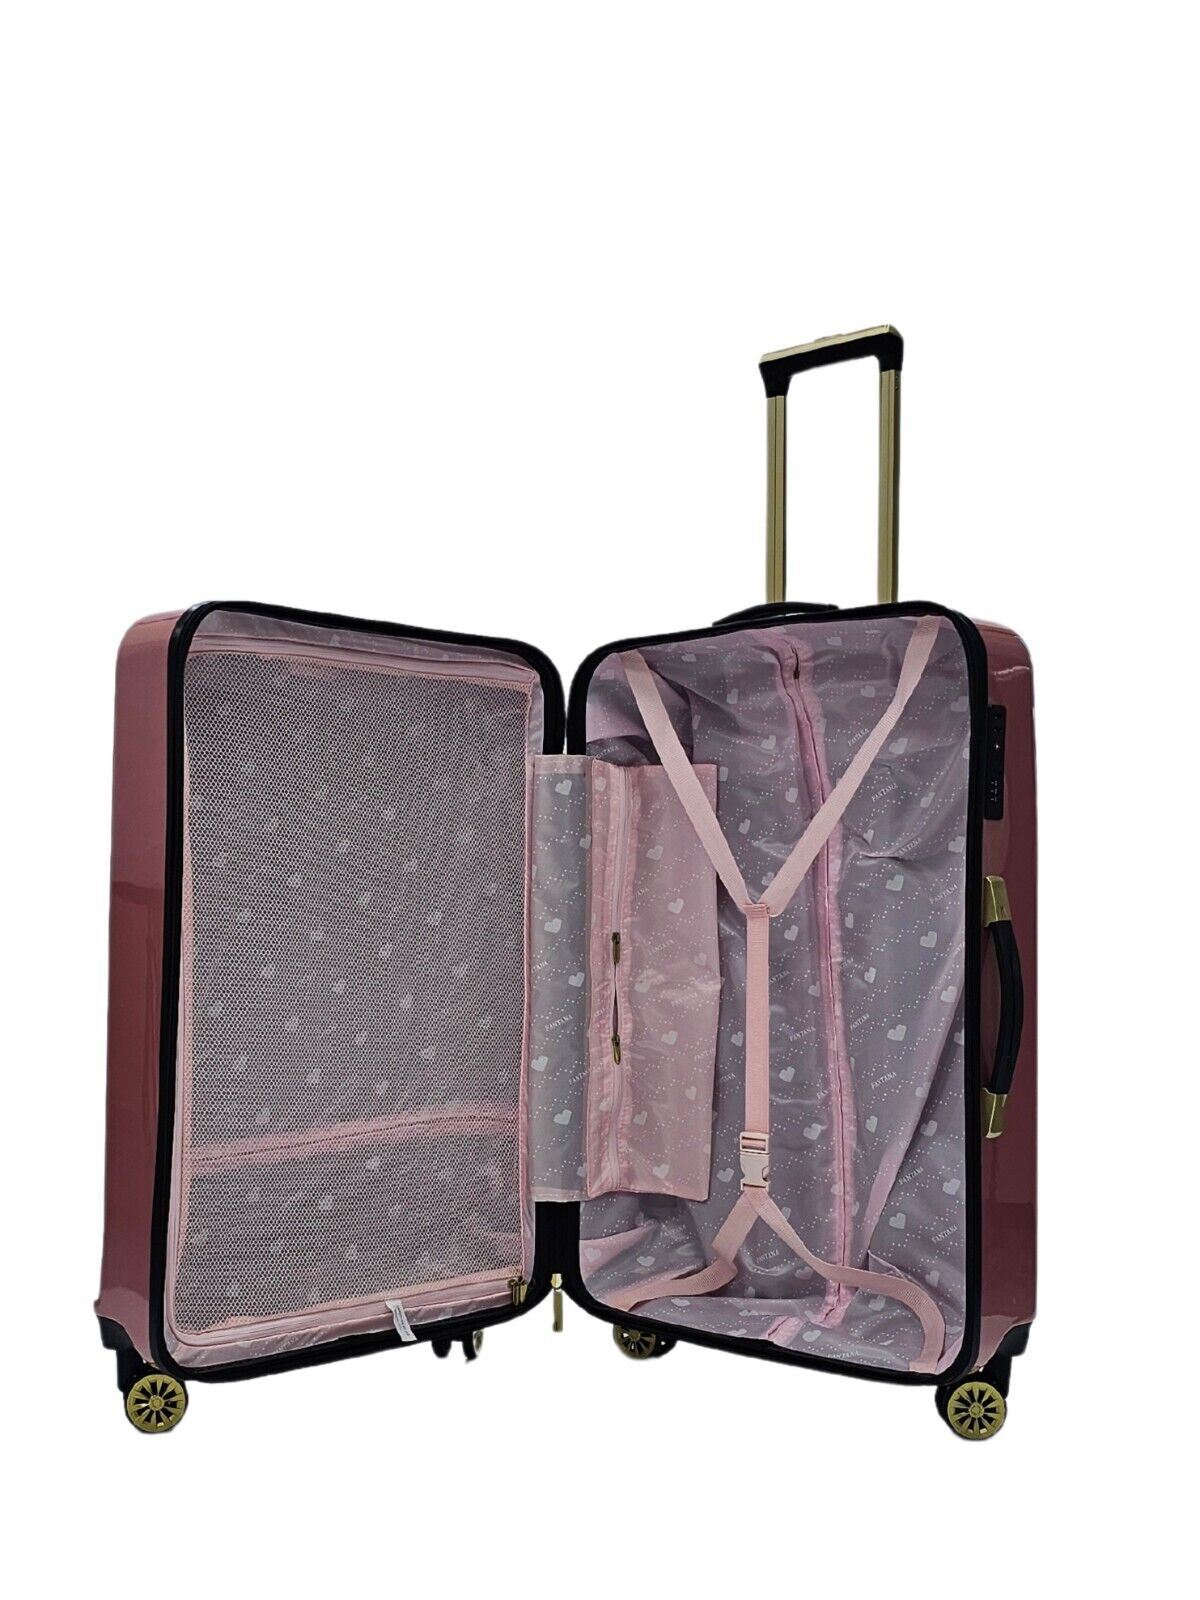 Butler Large Hard Shell Suitcase in Pink